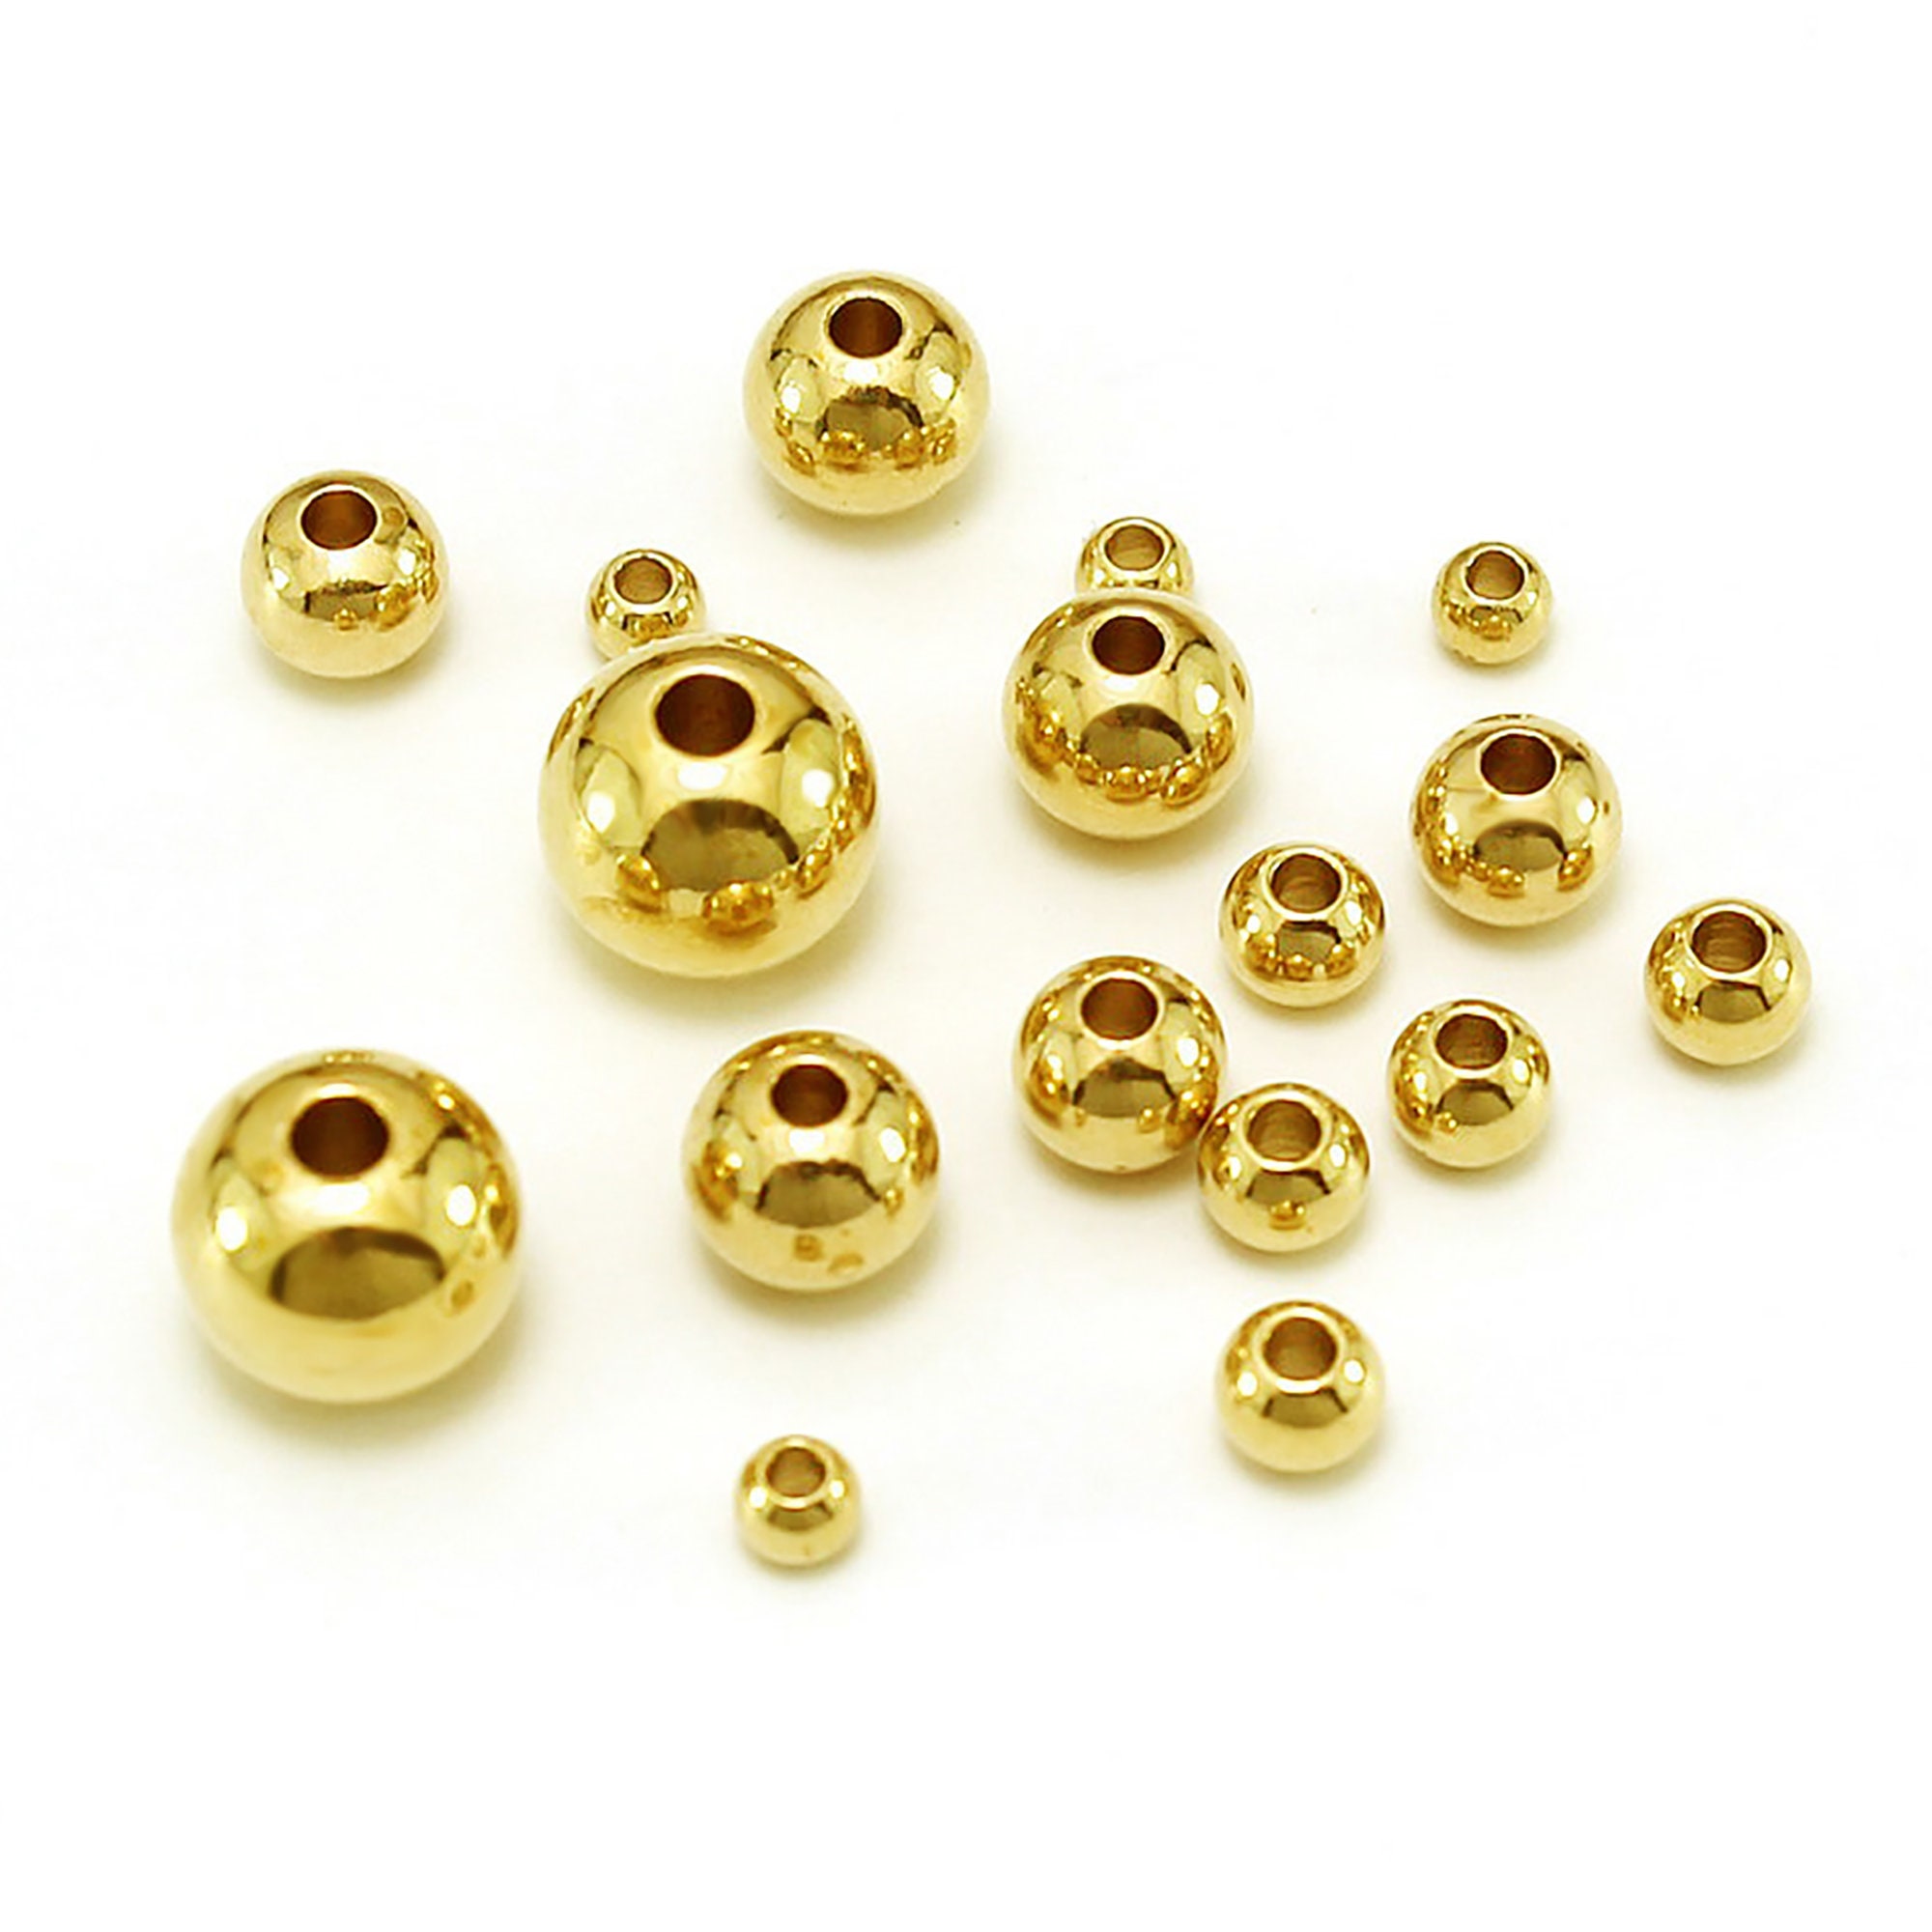 BEADIA 18K Gold Plated End Caps Non Tarnish 3x6mm 200pcs for Jewelry Making  Findings